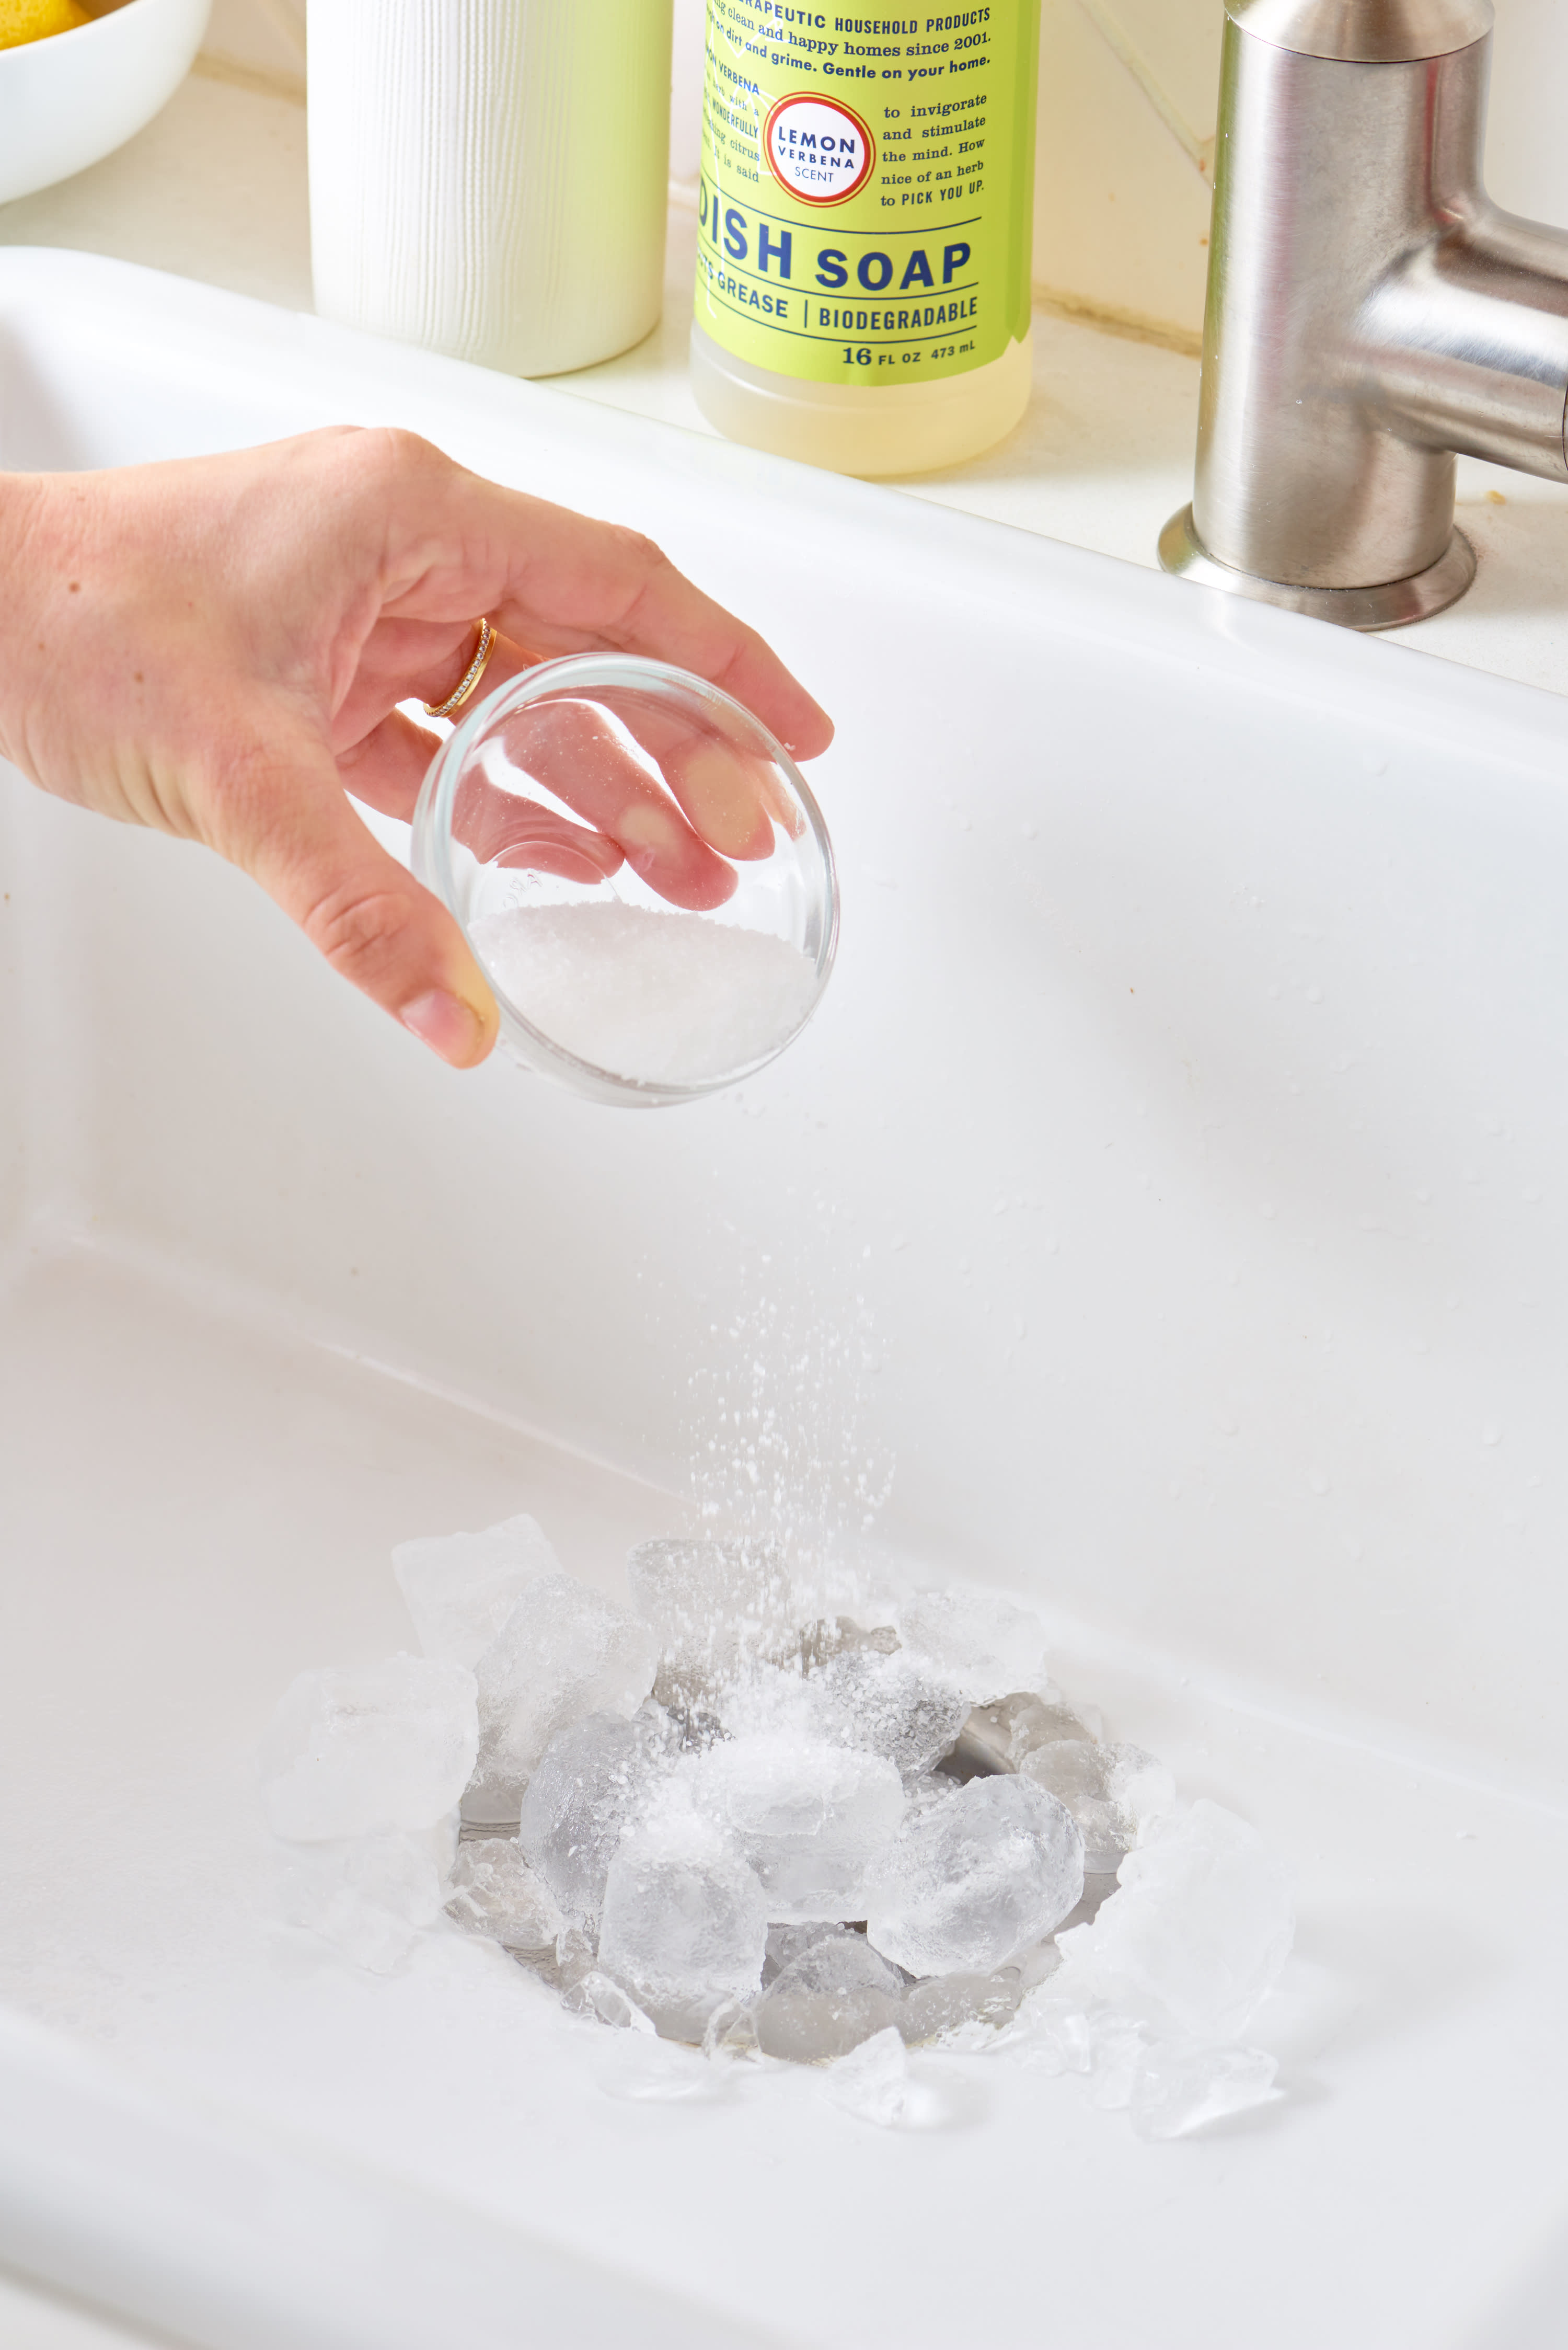 How to Clean Your Garbage Disposal: 12 Steps (with Pictures)